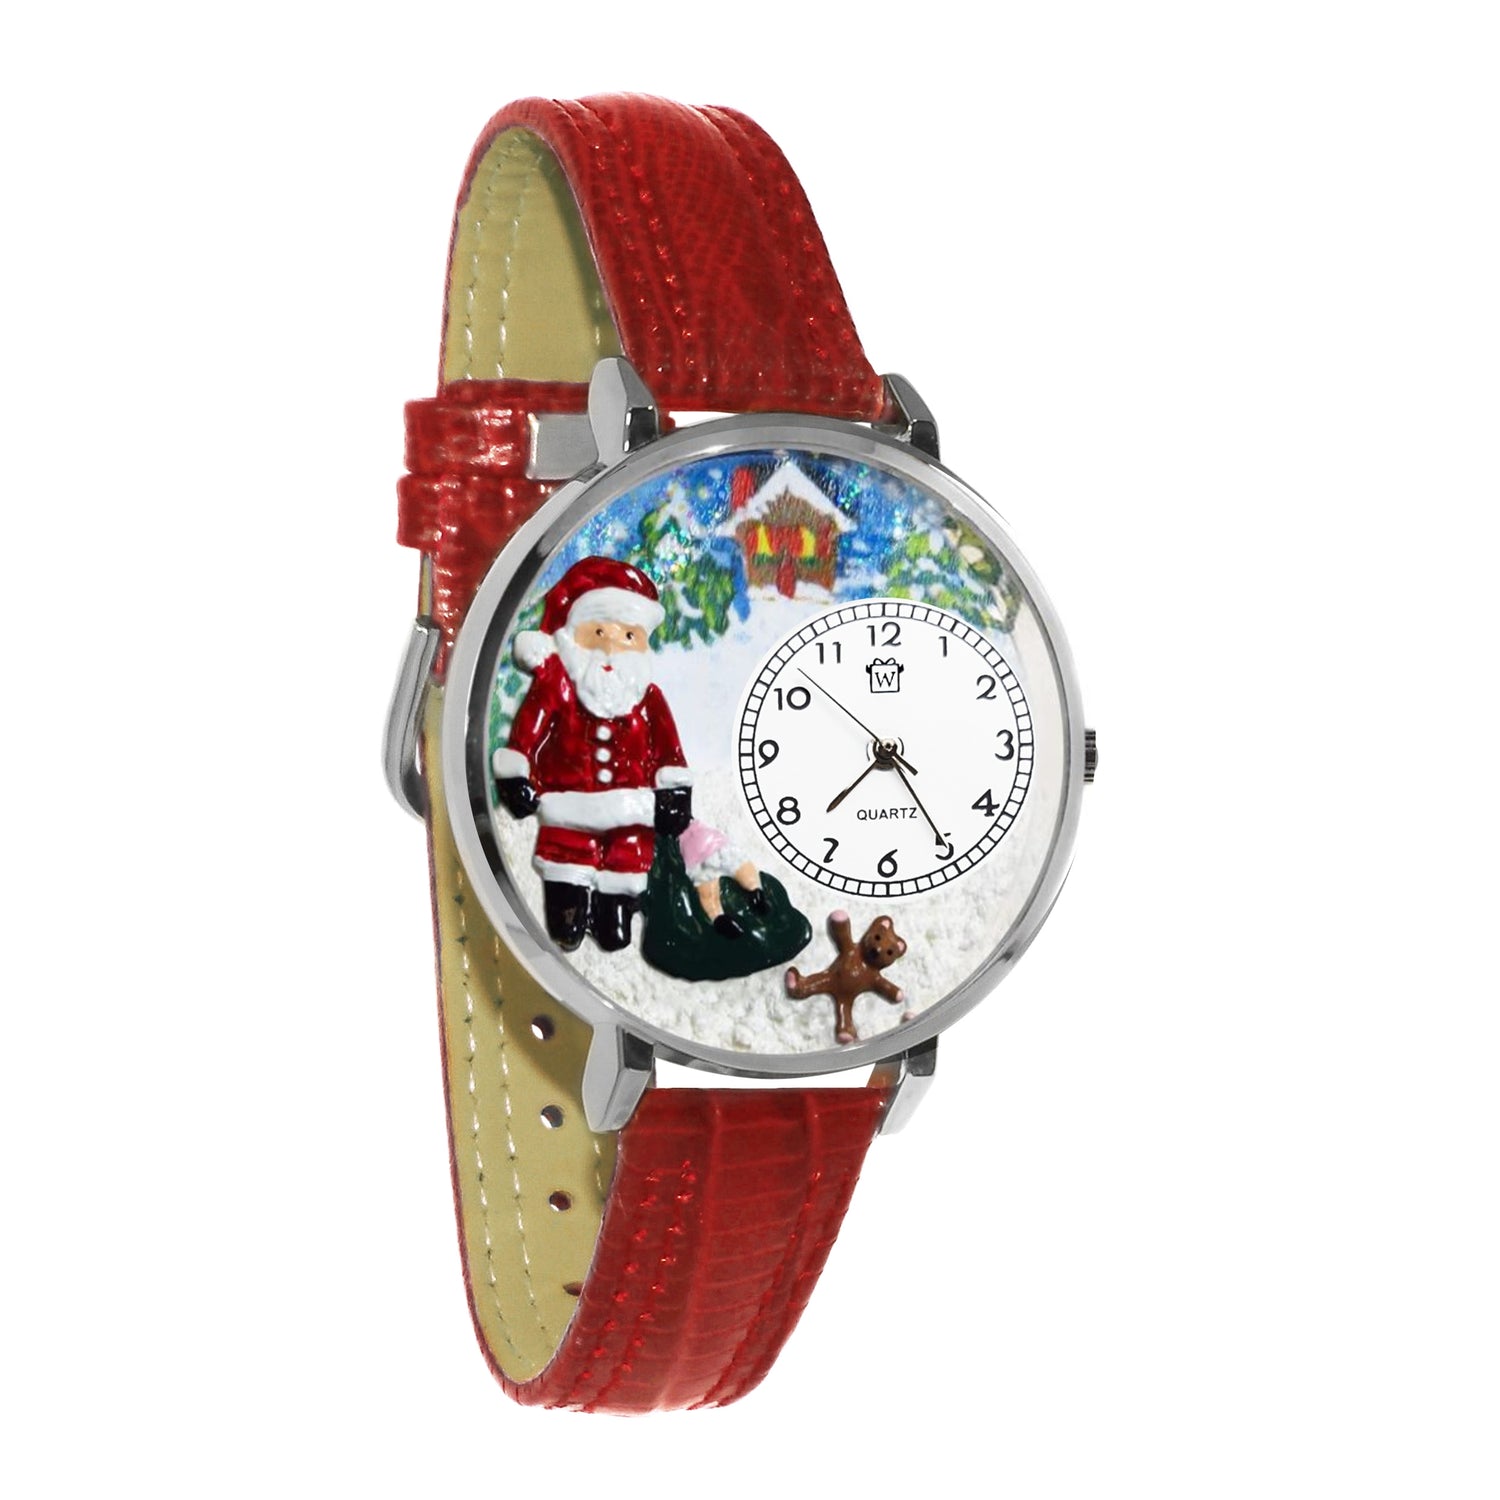 Whimsical Gifts | Santa Claus 3D Watch Large Style | Handmade in USA | Holiday & Seasonal Themed | Christmas | Novelty Unique Fun Miniatures Gift | Silver Finish Red Leather Watch Band